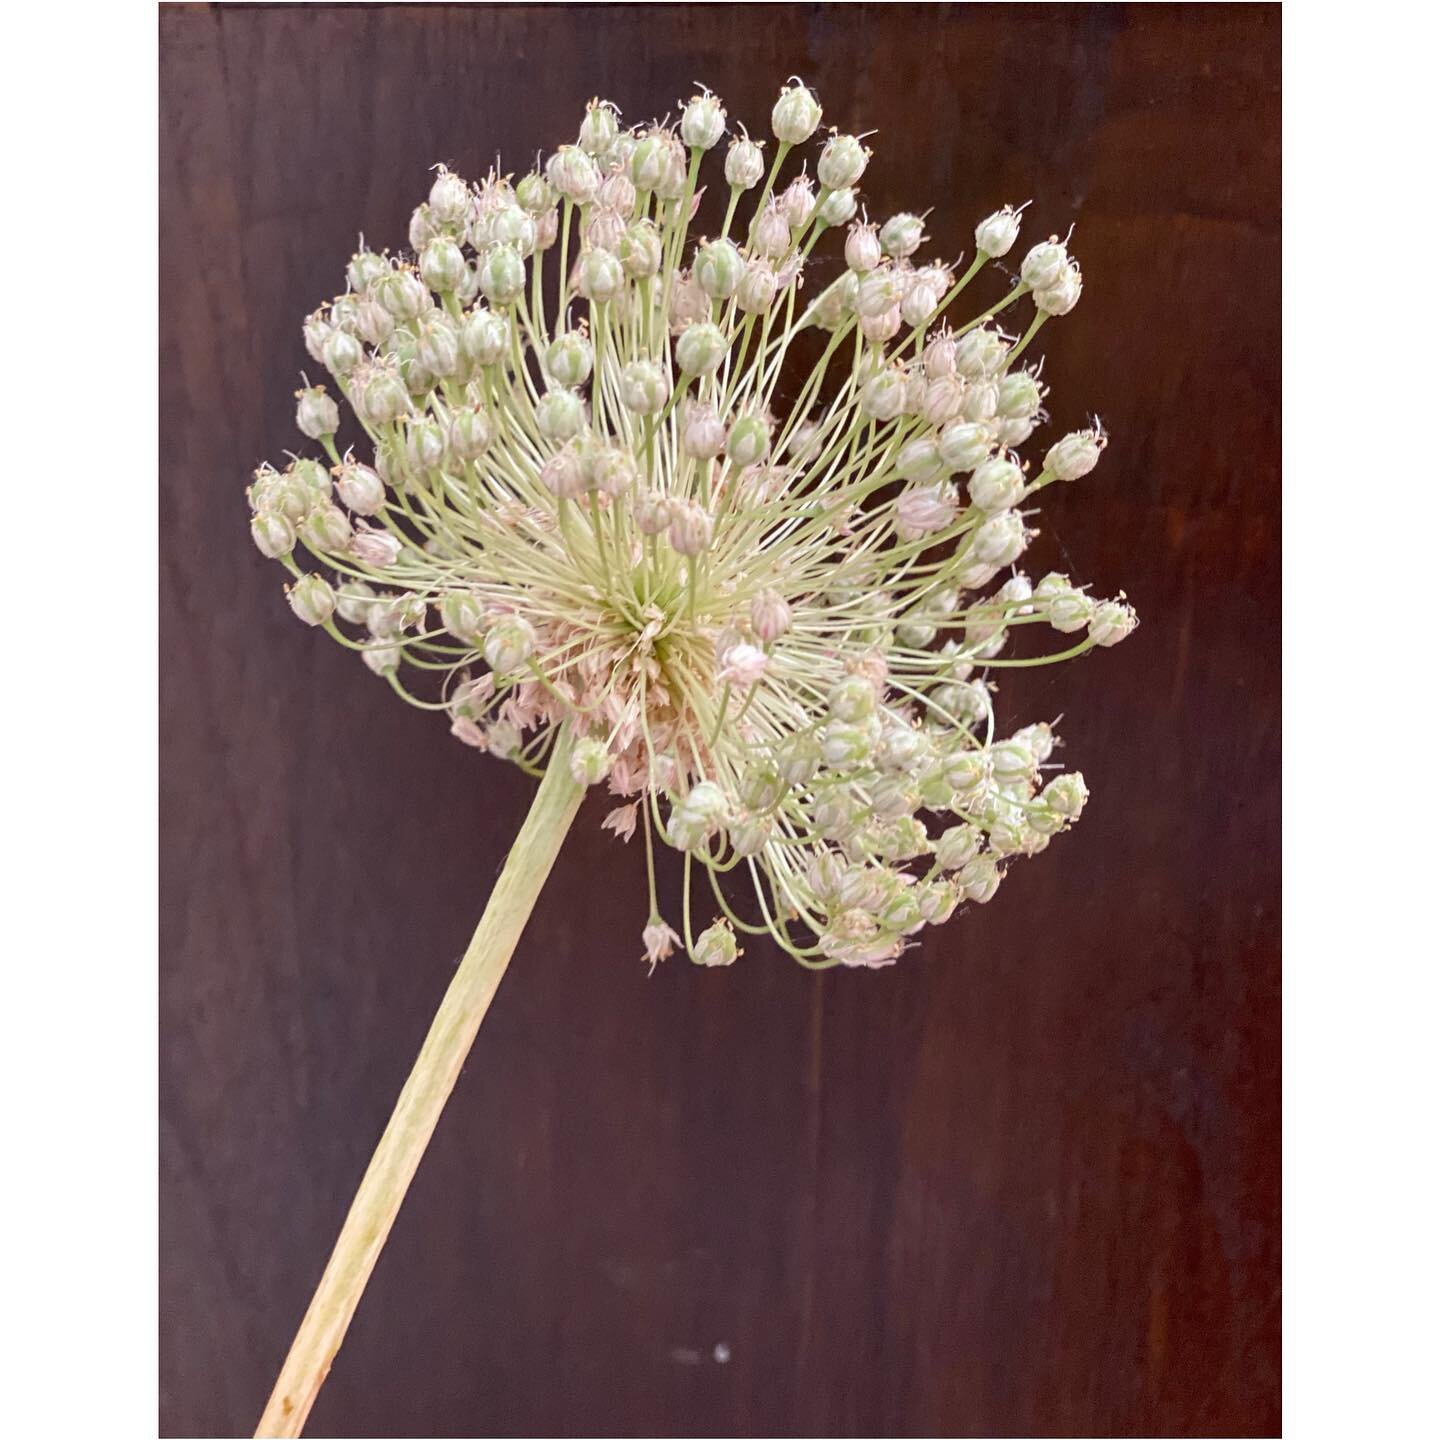 ❤️ Spring Onion Flowers ❤️ Details from beautiful @lucindachambersartist house ❤️ #botanicals #flowers #inspiration #socialcontentcreation #stylingmrsoliverloves #lucindachambersartist #southernhighlandsnsw #southernhighlands